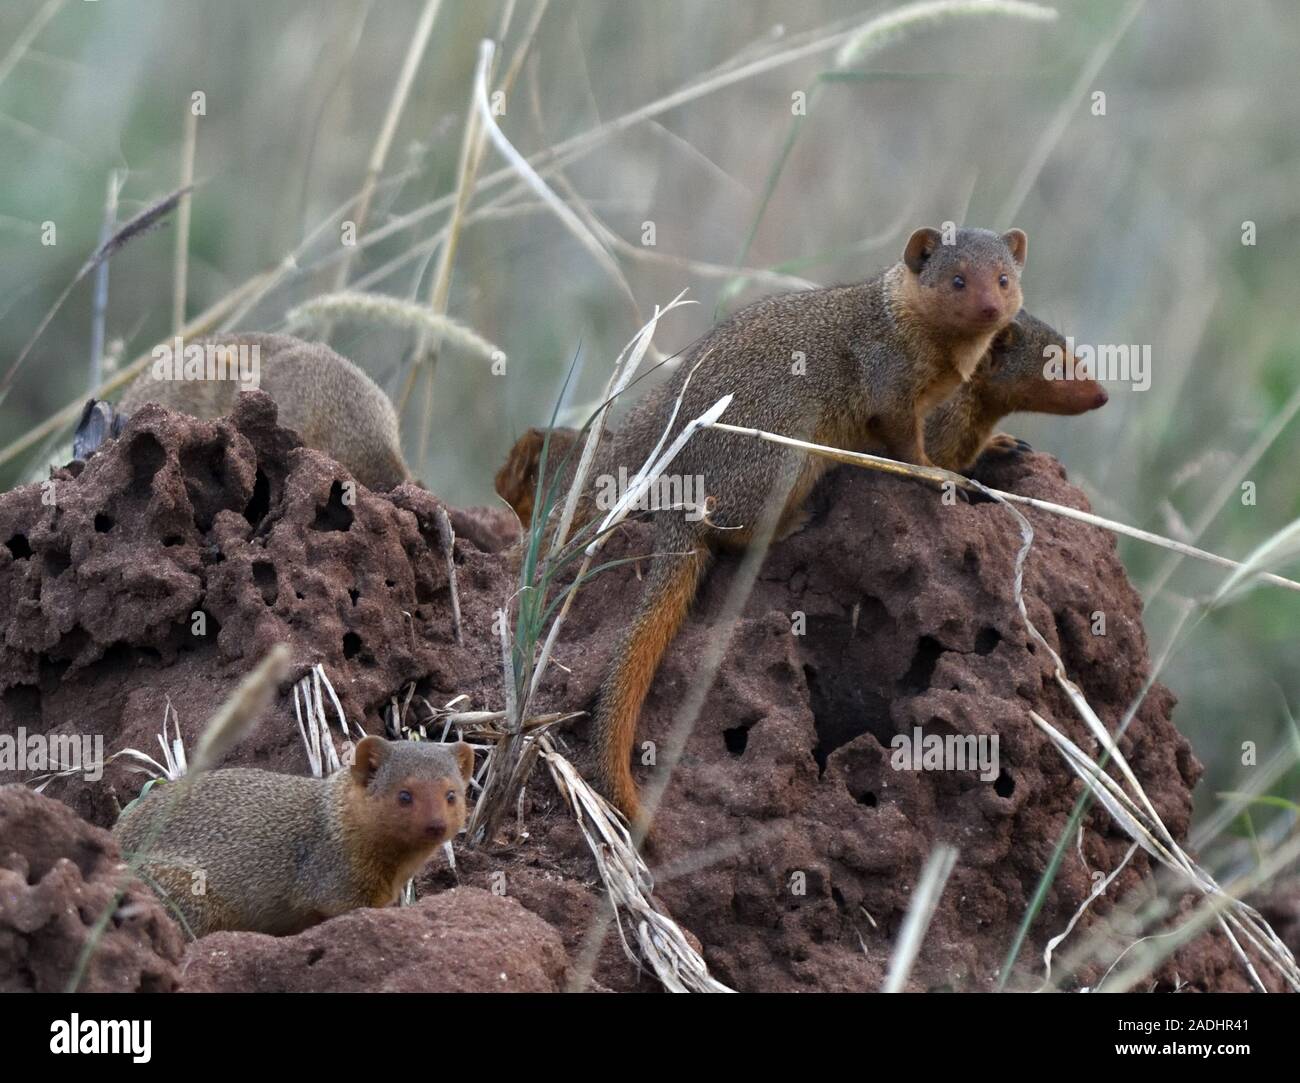 A group of common dwarf mongoose (Helogale parvula) on a termite mound that is probably their sleeping place. Serengeti National Park, Tanzania. Stock Photo